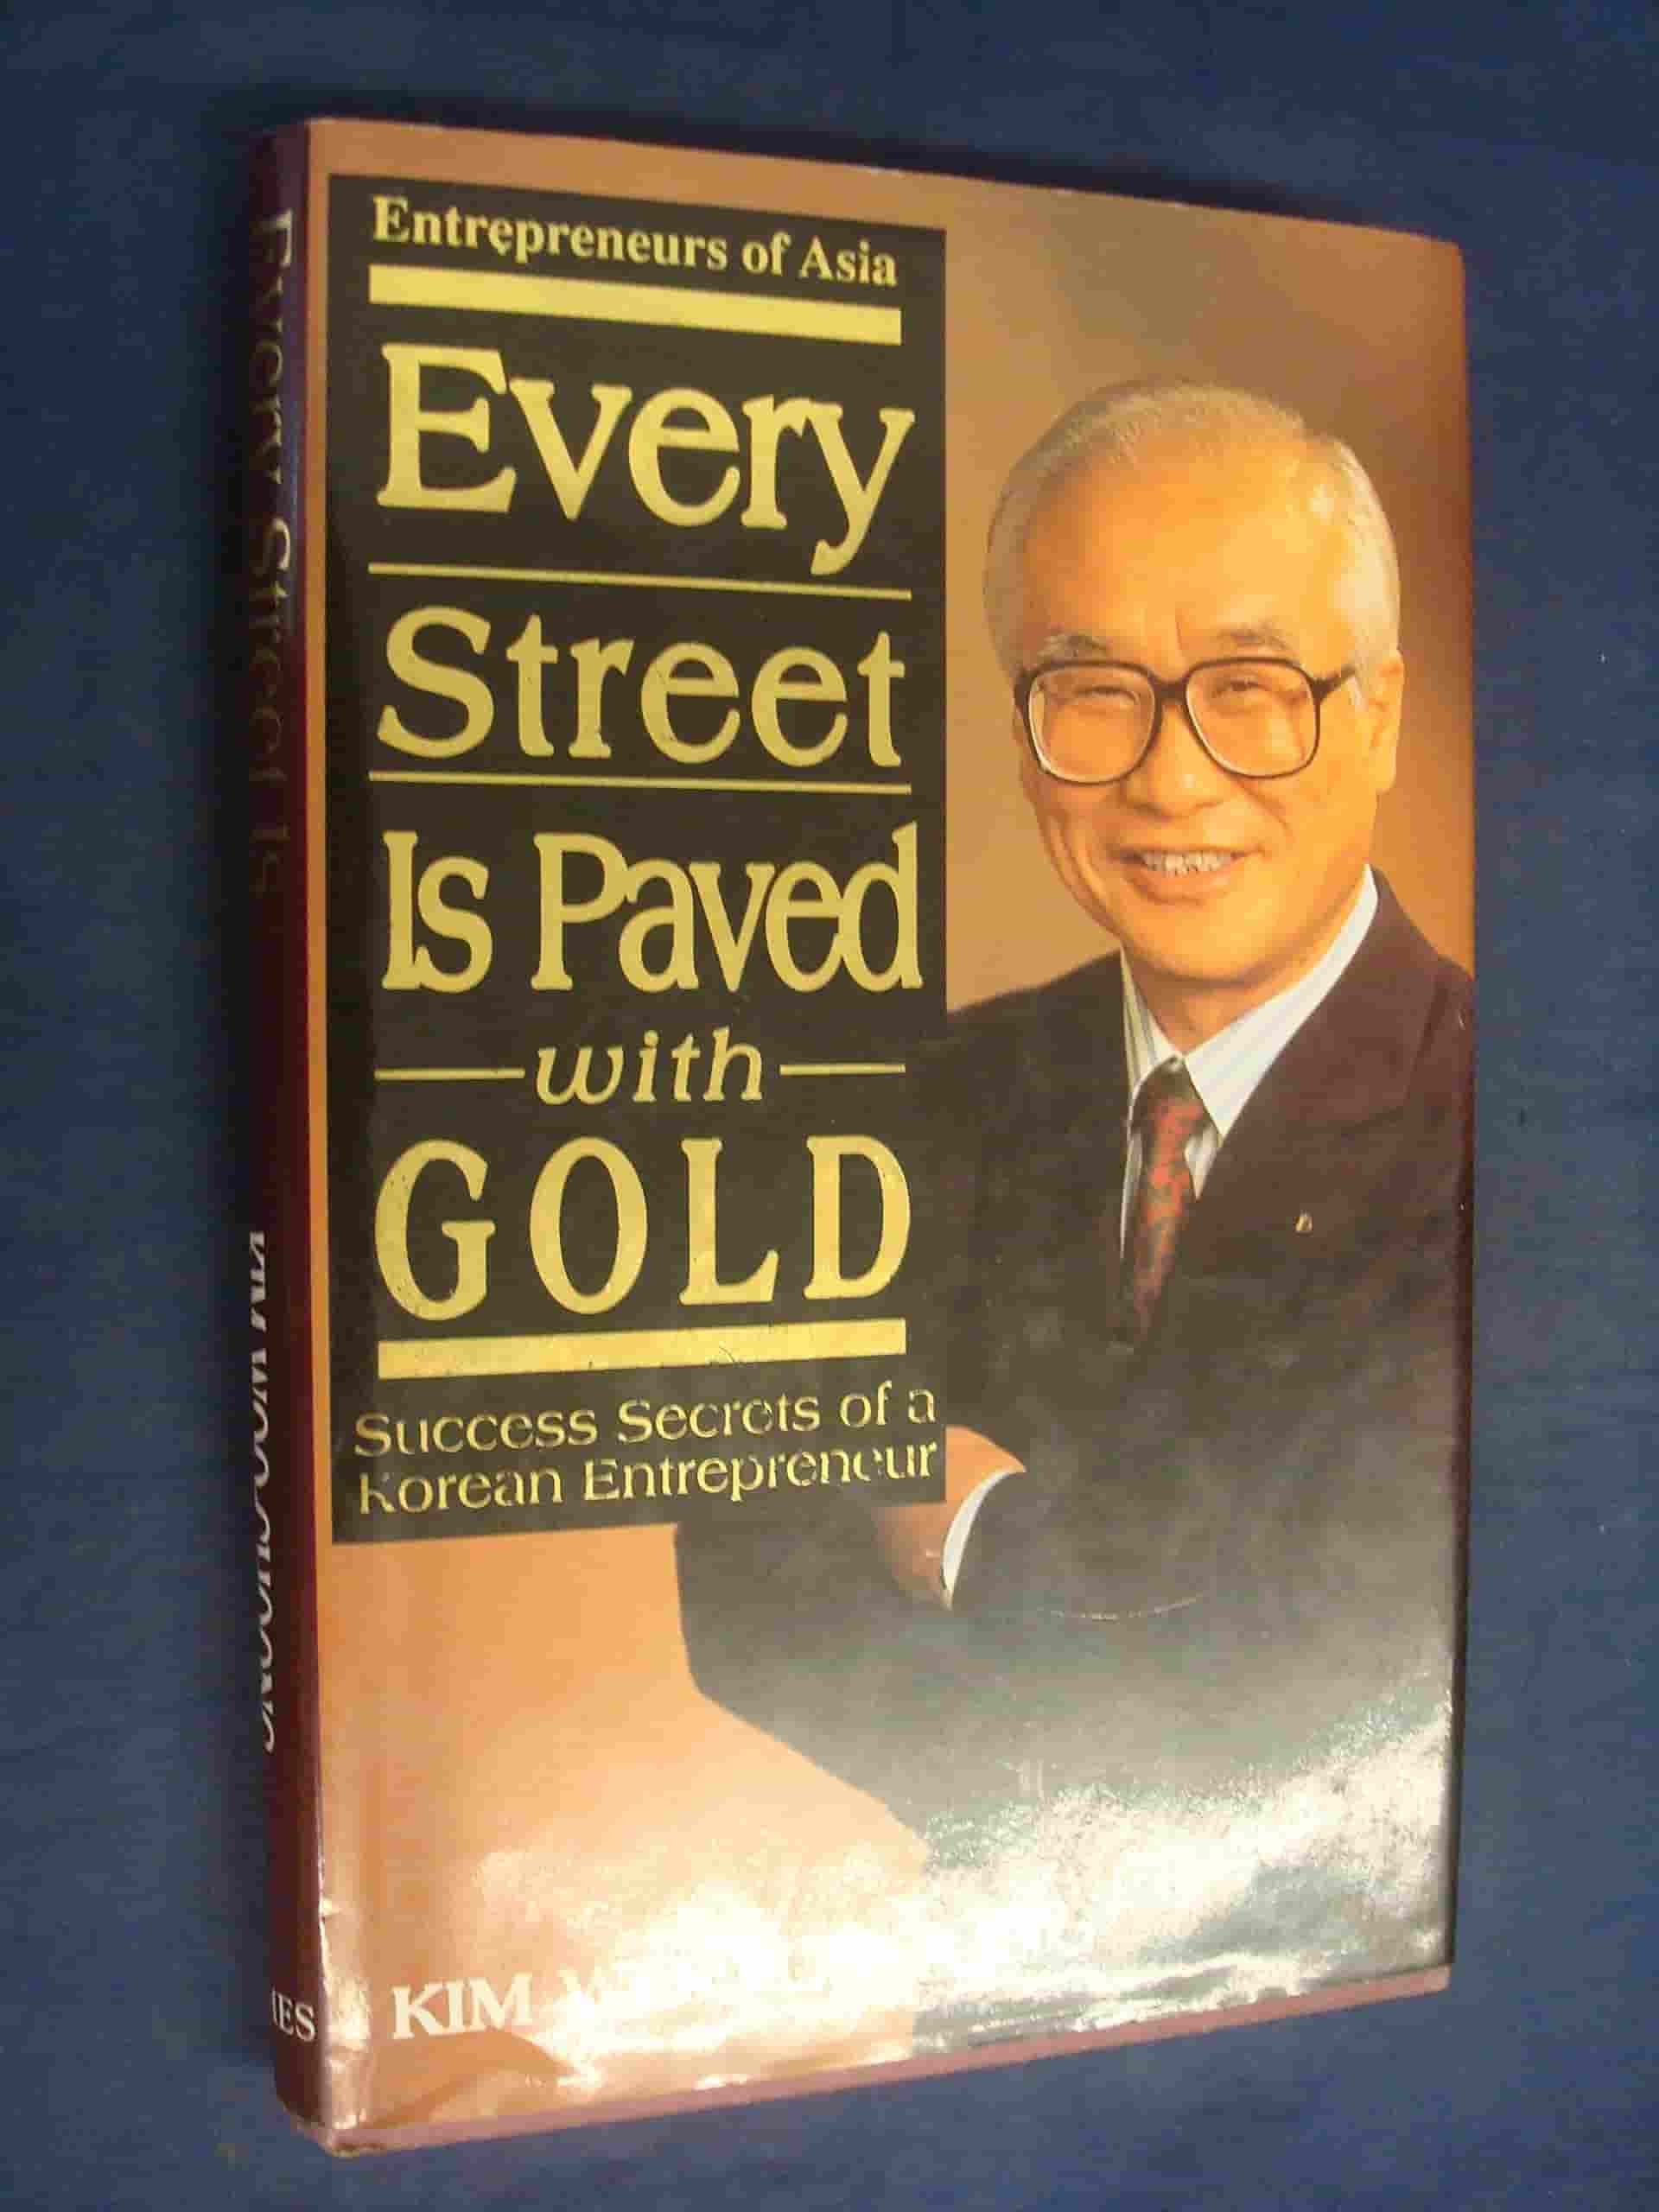 Paving every street of gold